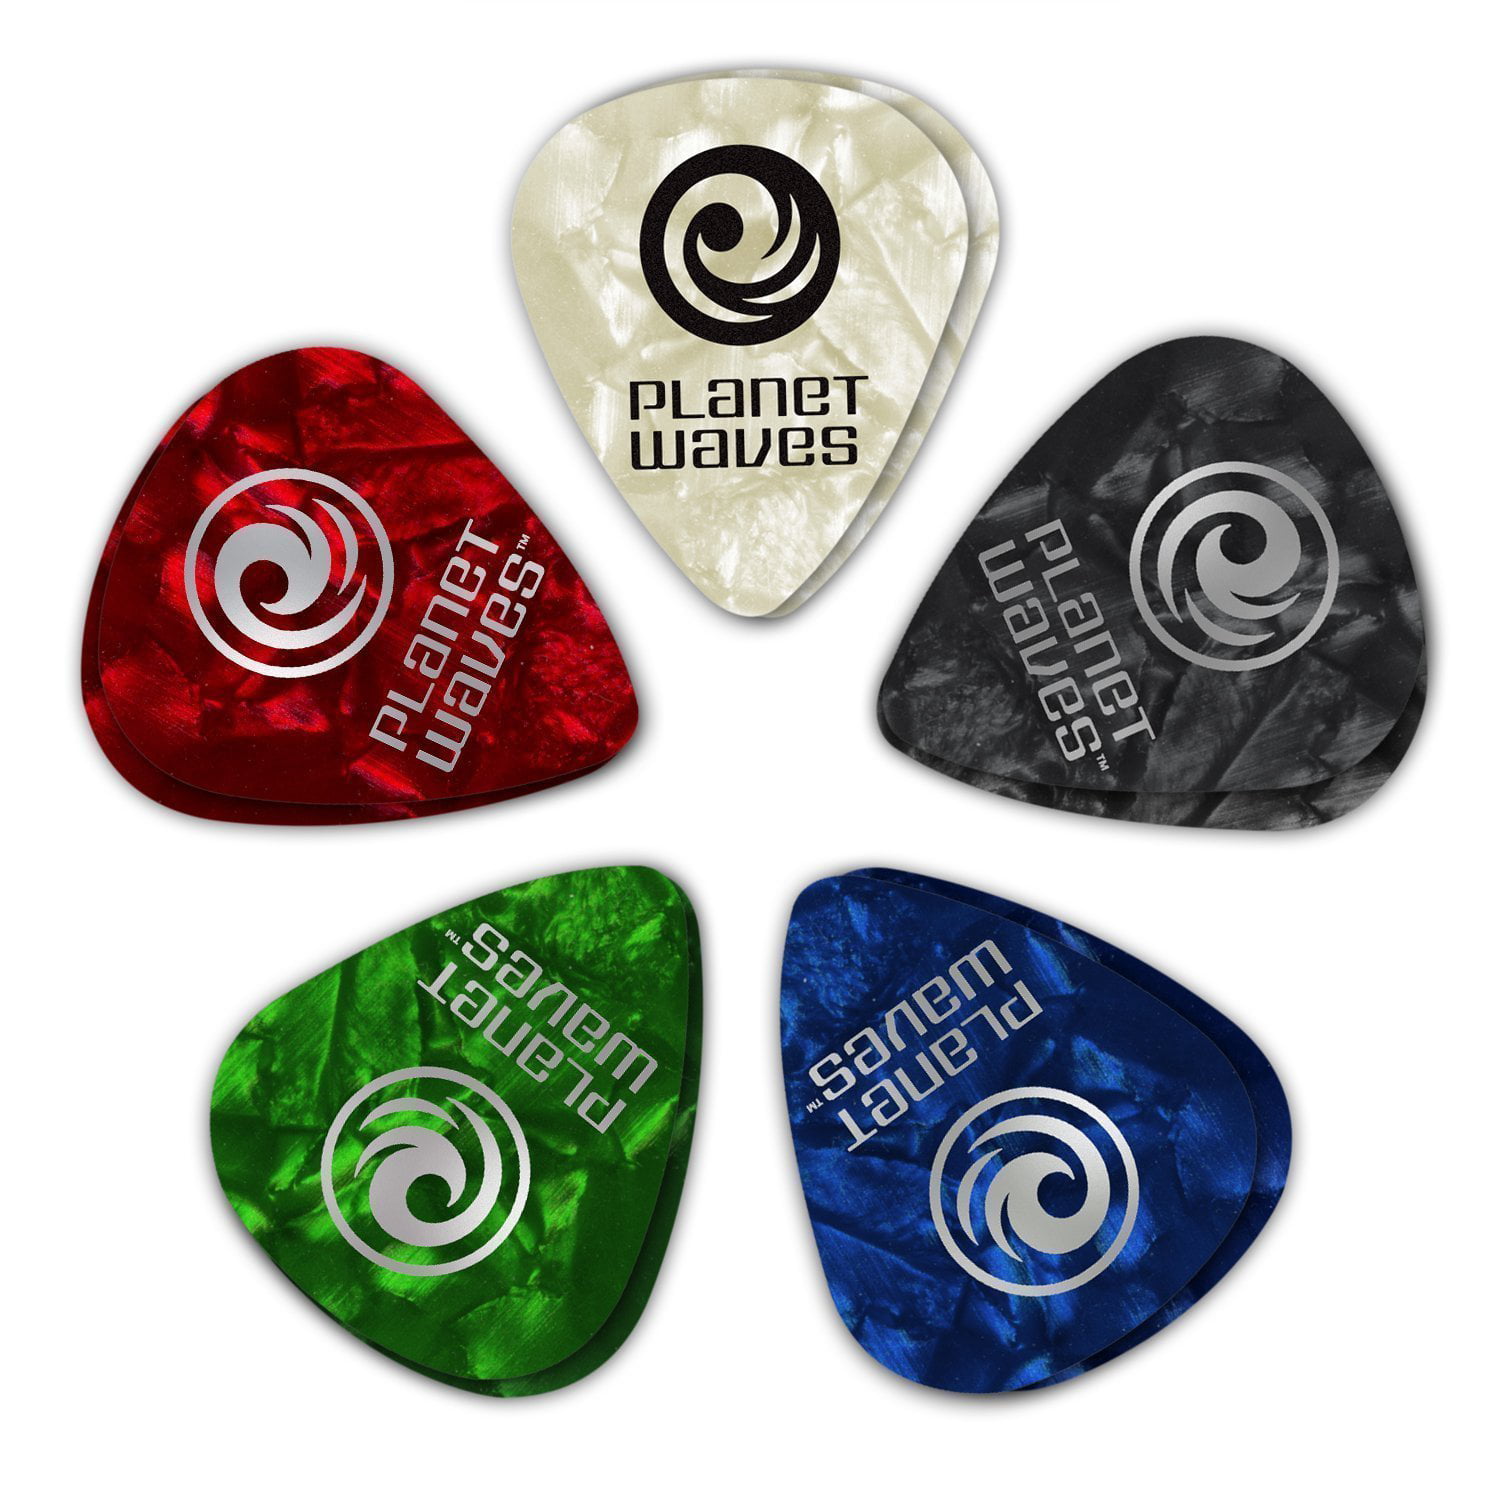 Medium Guitar Picks Suitable for Acoustic Guitar Electric Guitar Bass Ukulele 16 Pack Premium Pearl Celluloid Guitar Picks with Case Includes Thin Heavy & Extra Heavy Gauges Random Color 